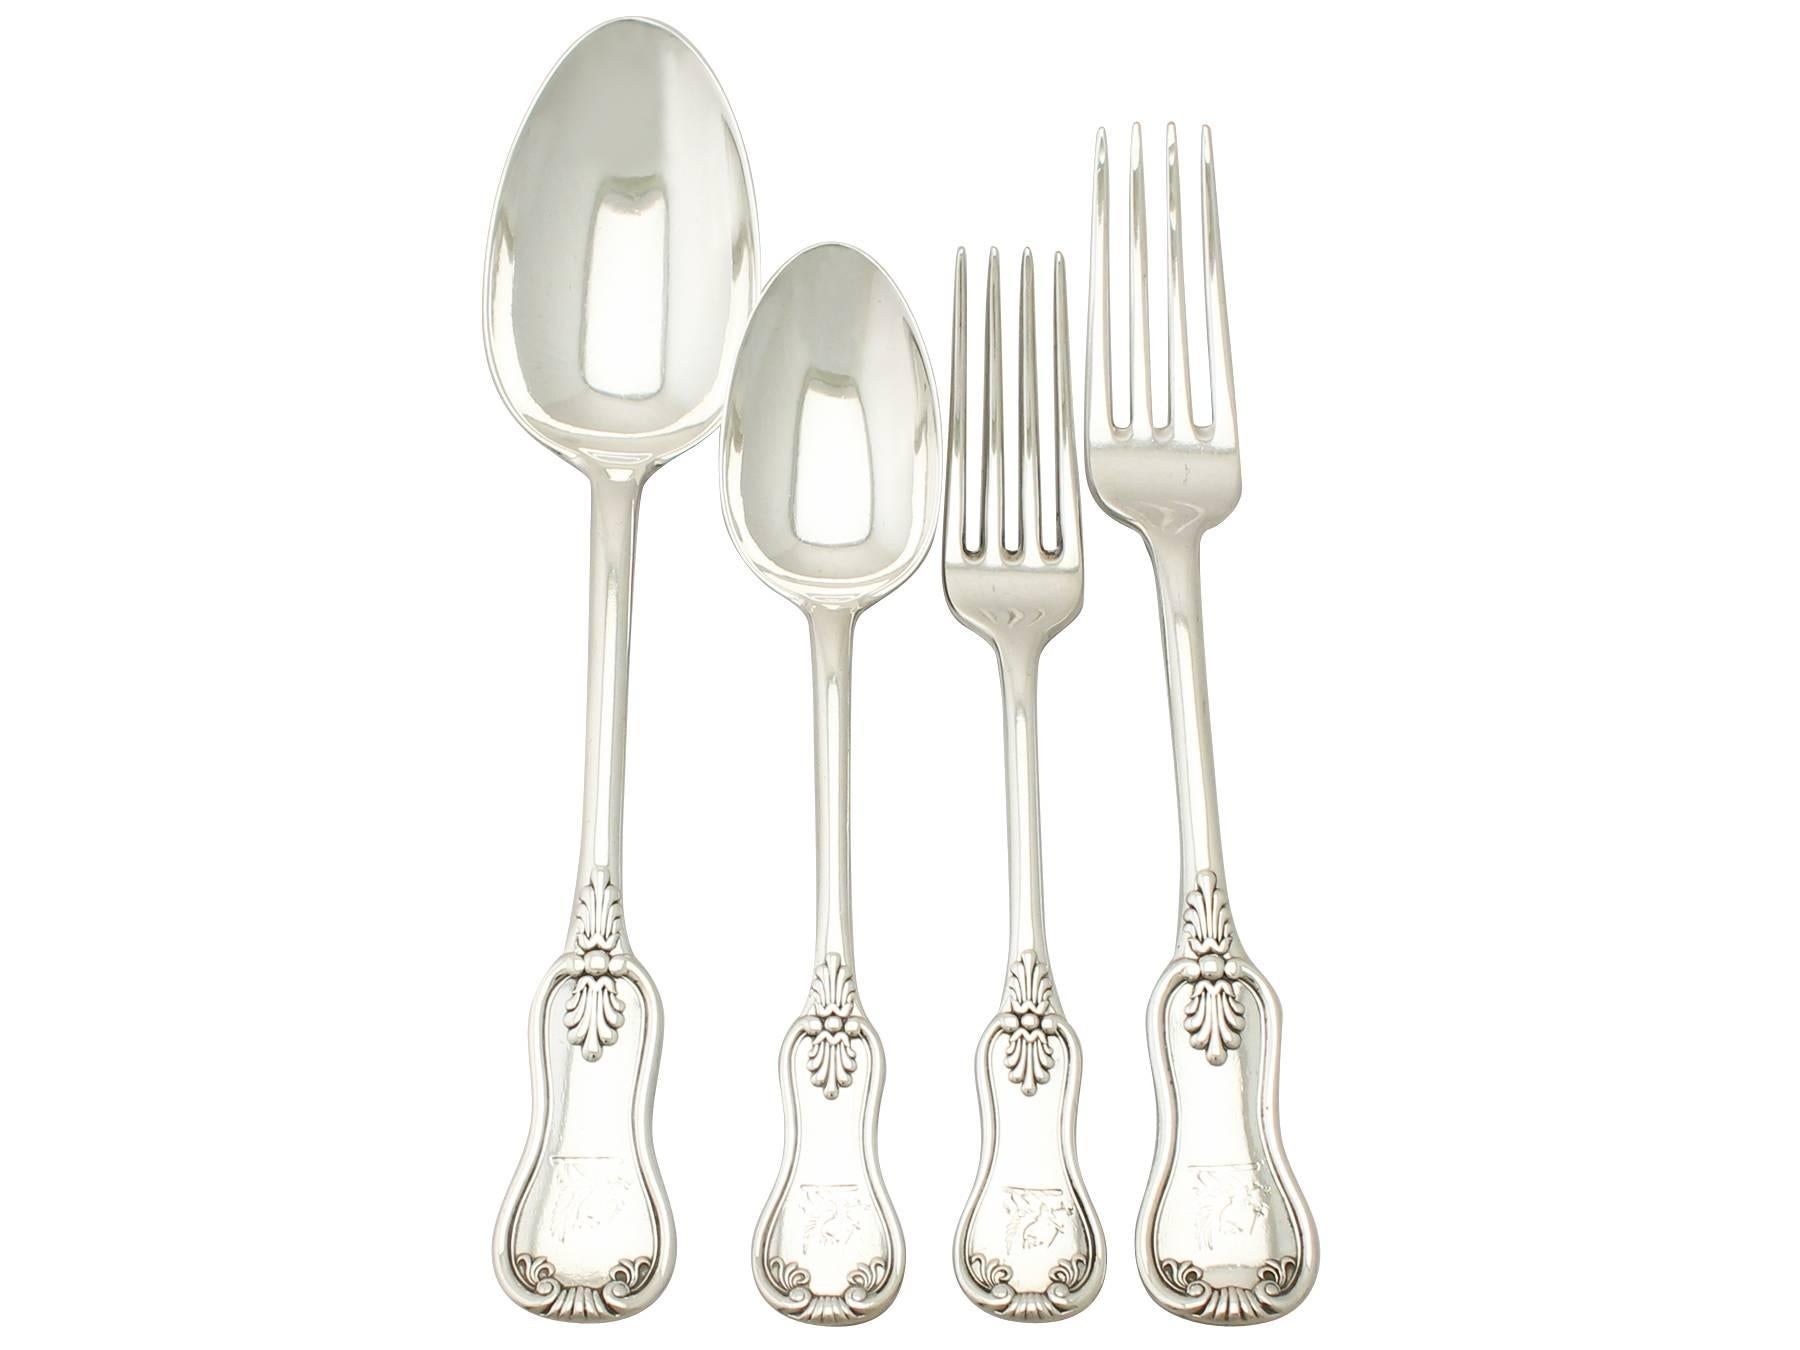 A fine and impressive antique Victorian Scottish sterling silver straight Kings pattern flatware service for twelve persons, an addition to our canteen of cutlery collection.

The pieces of this fine, antique Victorian Scottish sterling silver